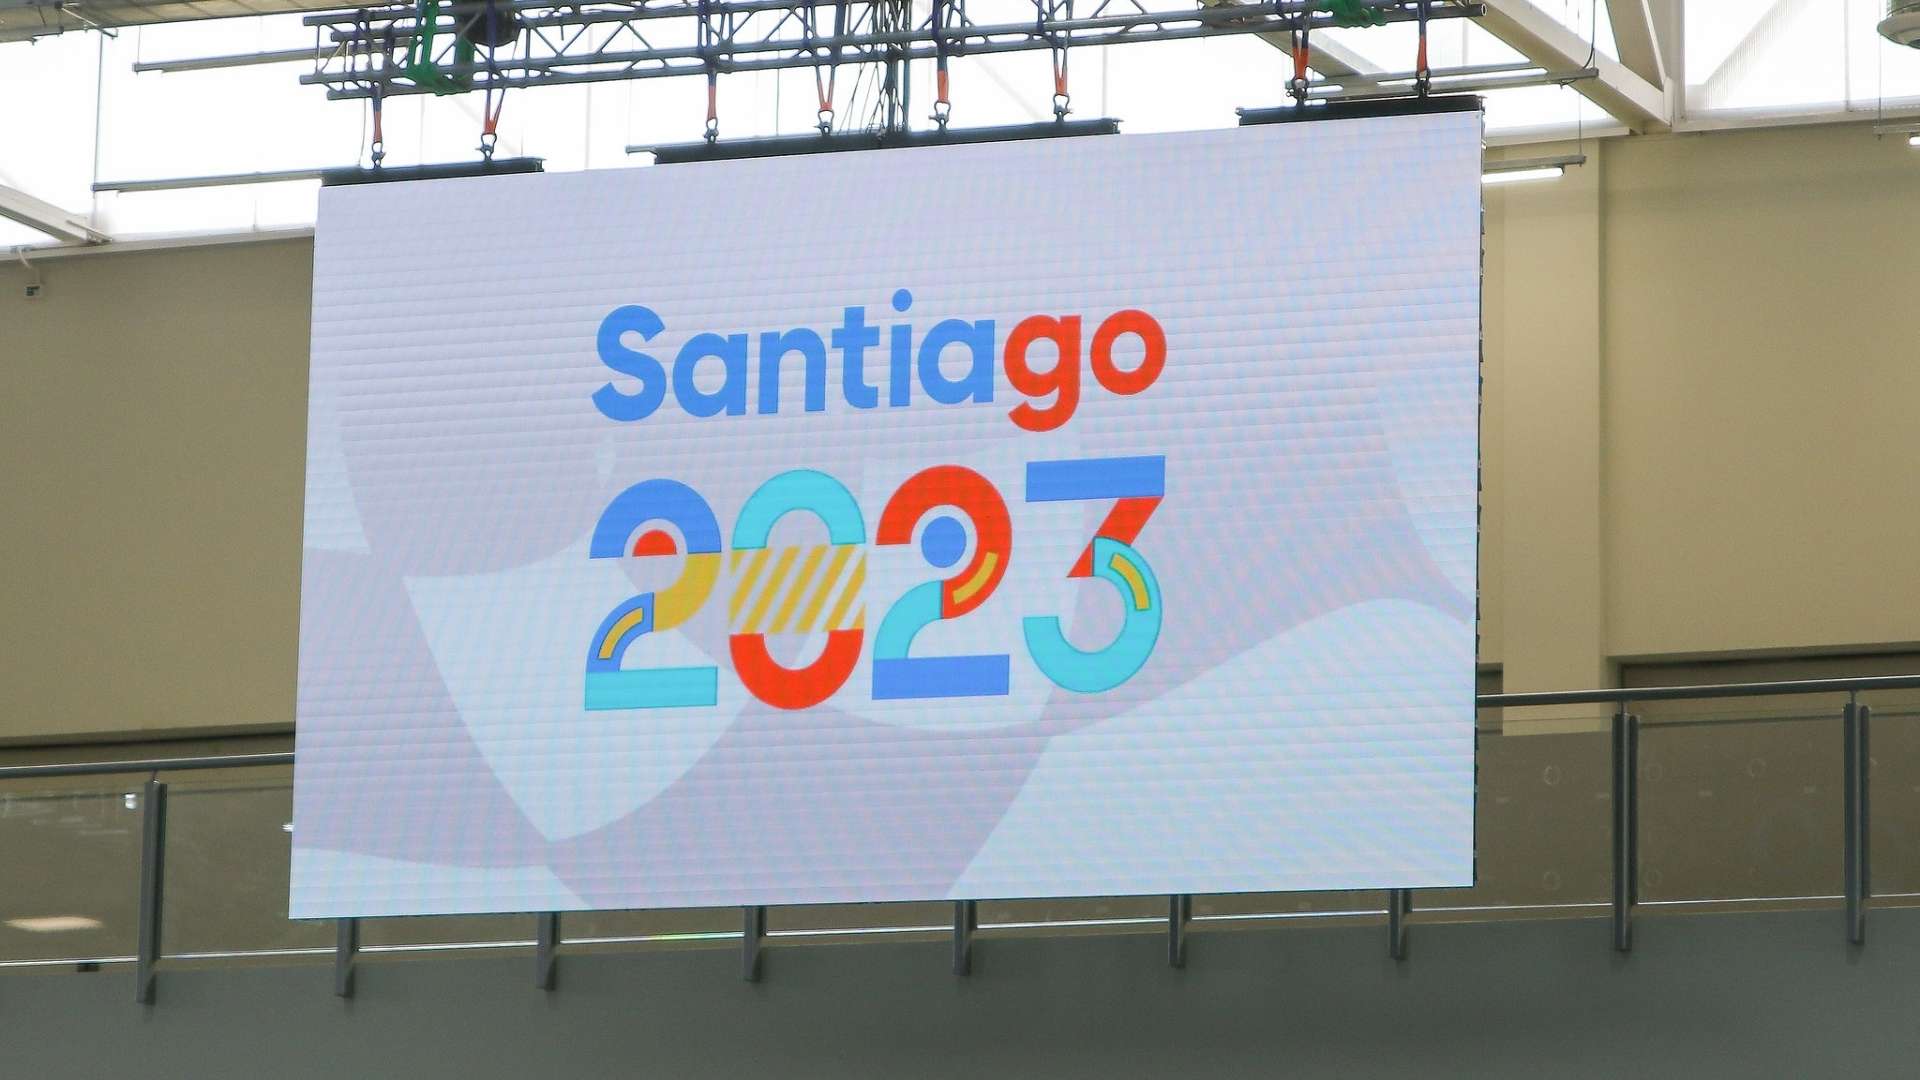 Check out the sport calendar for the first week of the Santiago 2023 Pan American Games